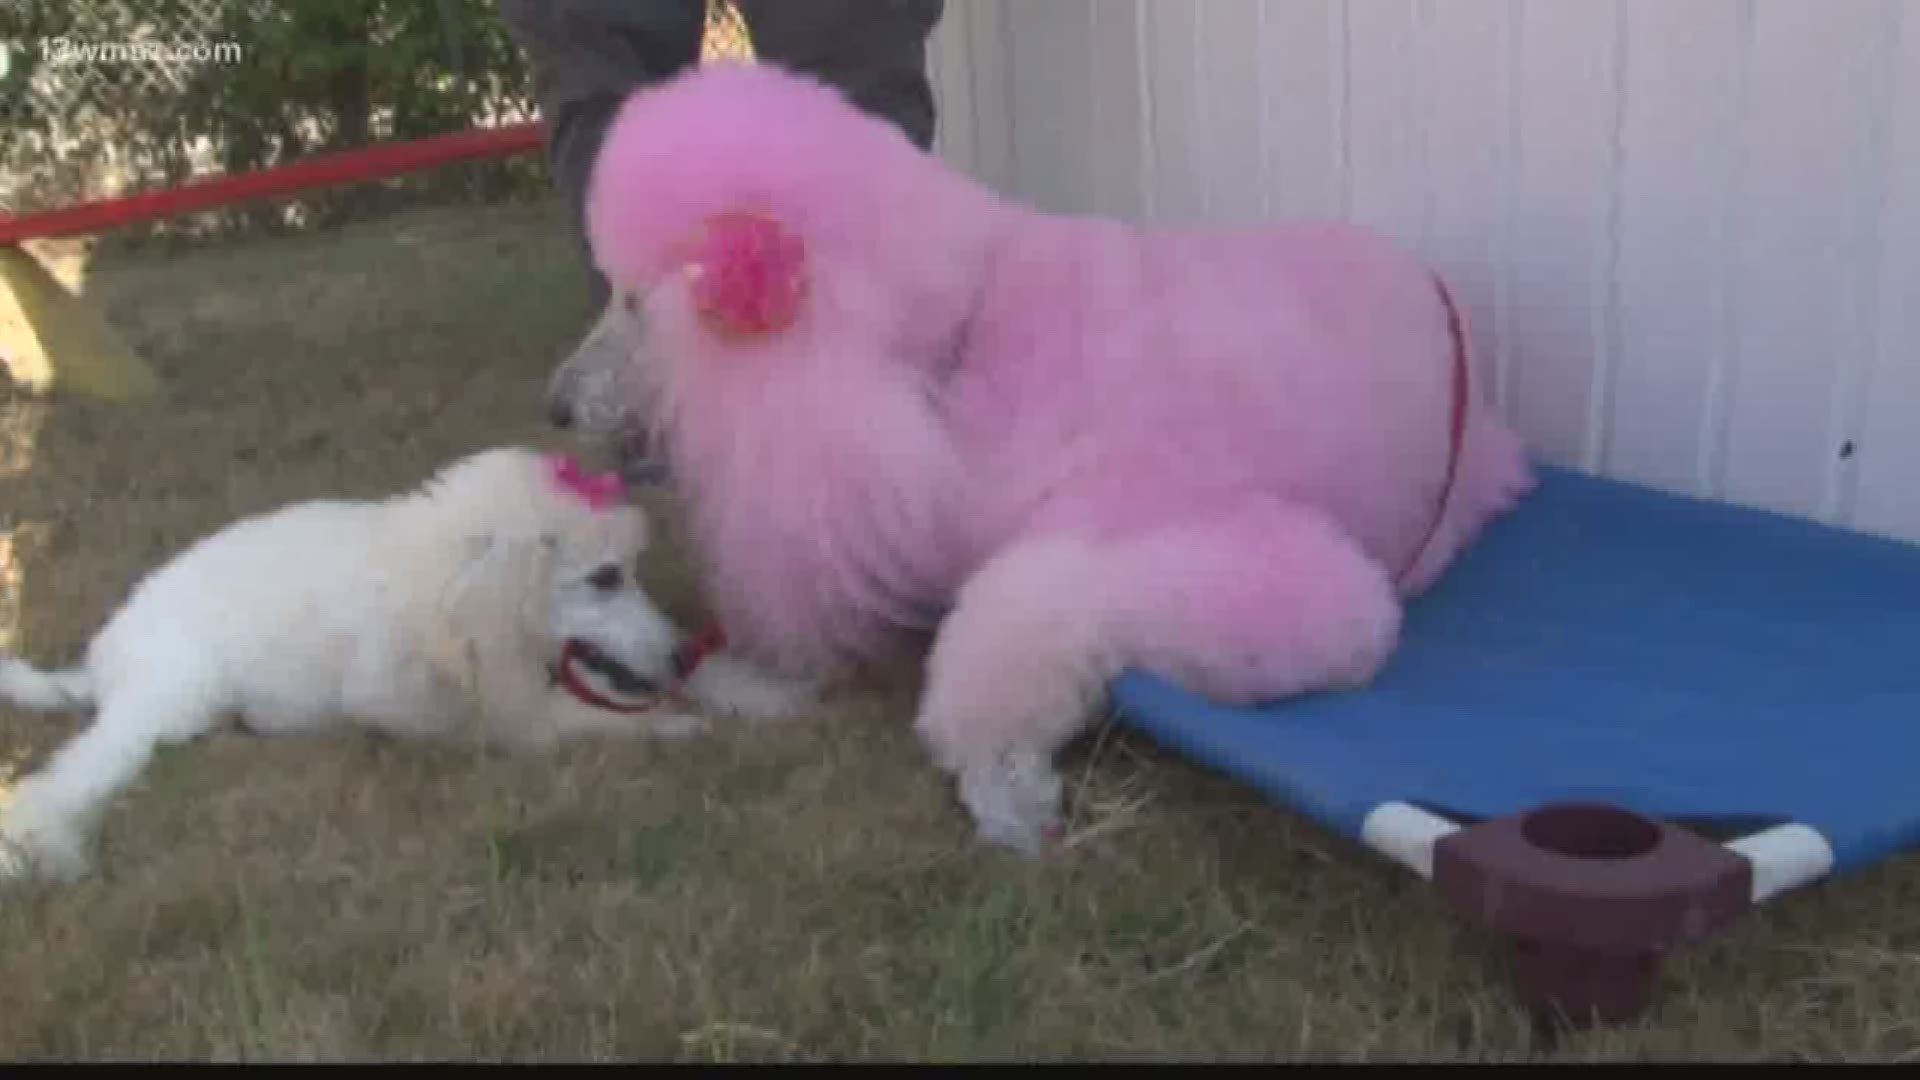 Cherry Blossom Festival welcomes new poodle puppy